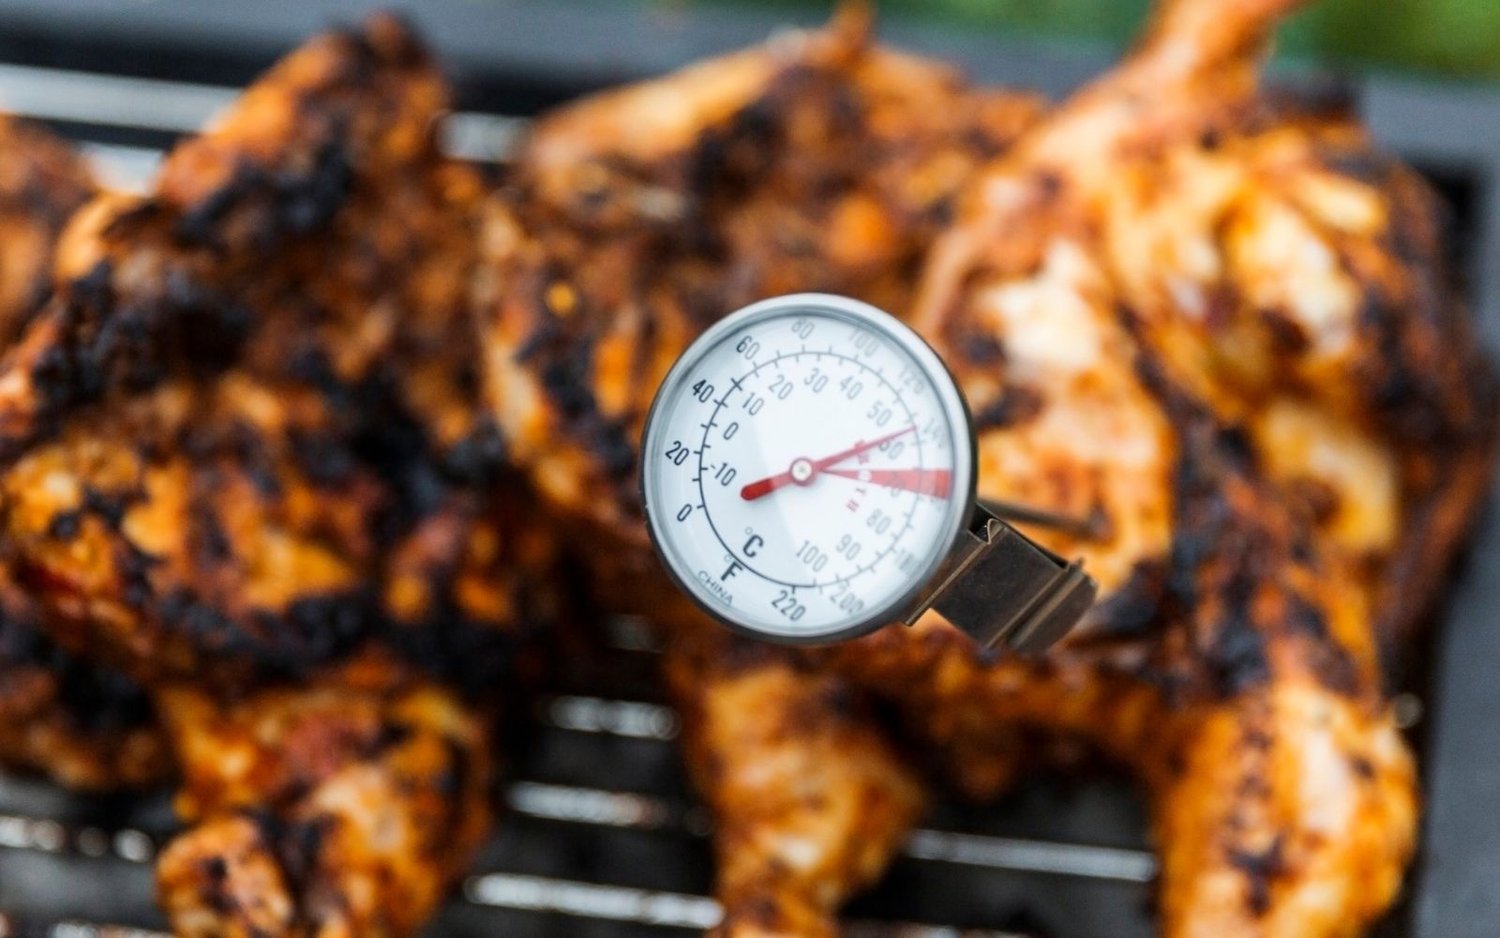 Meat Science 102: How to Cook Safely with a Thermometer